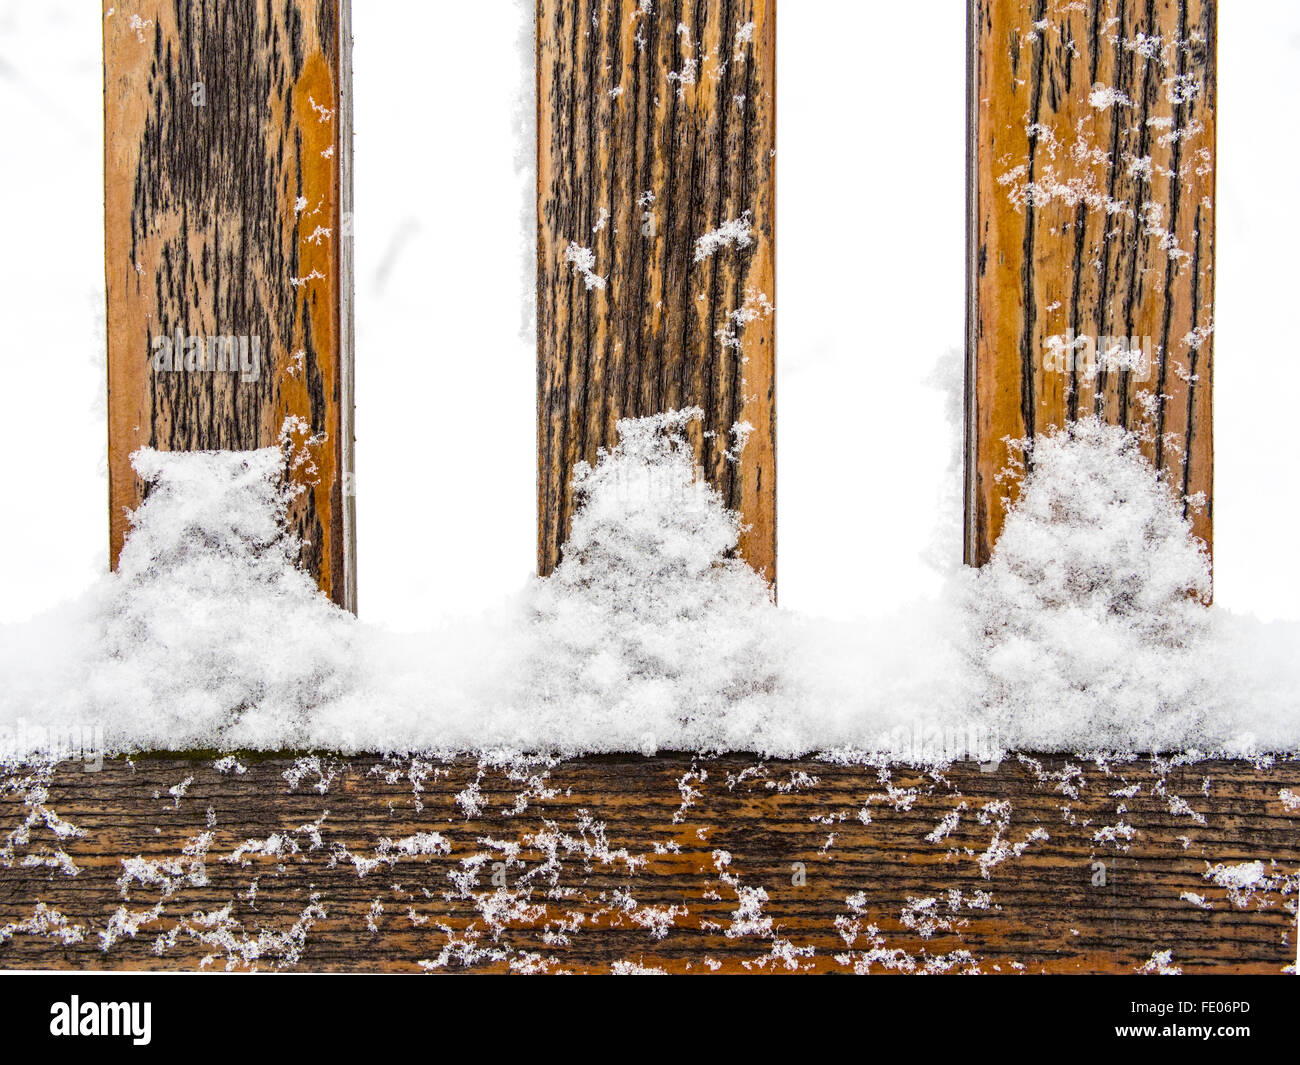 Three wooden rungs or spokes covered with snow Stock Photo